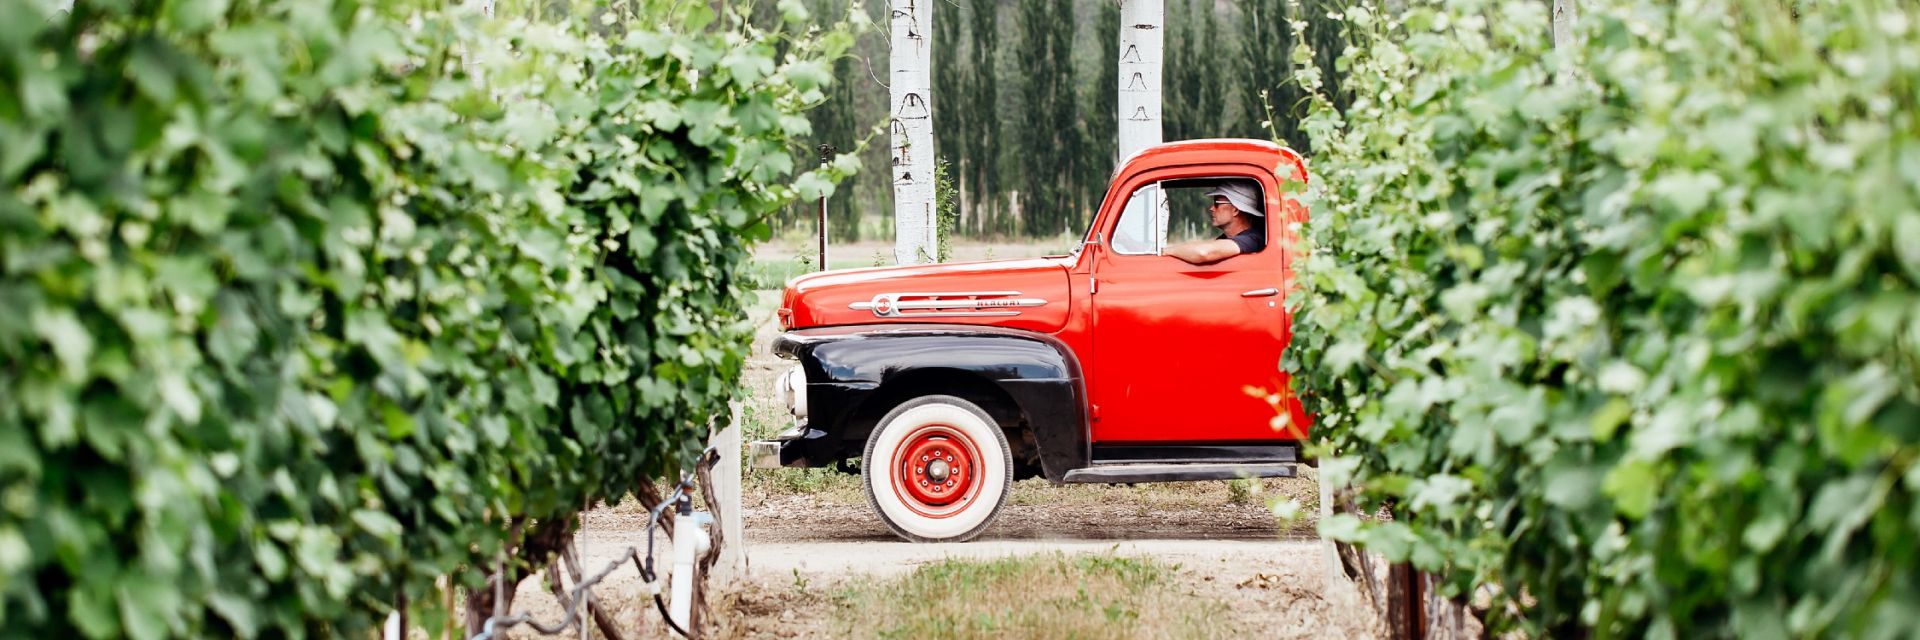 red truck in a vineyard